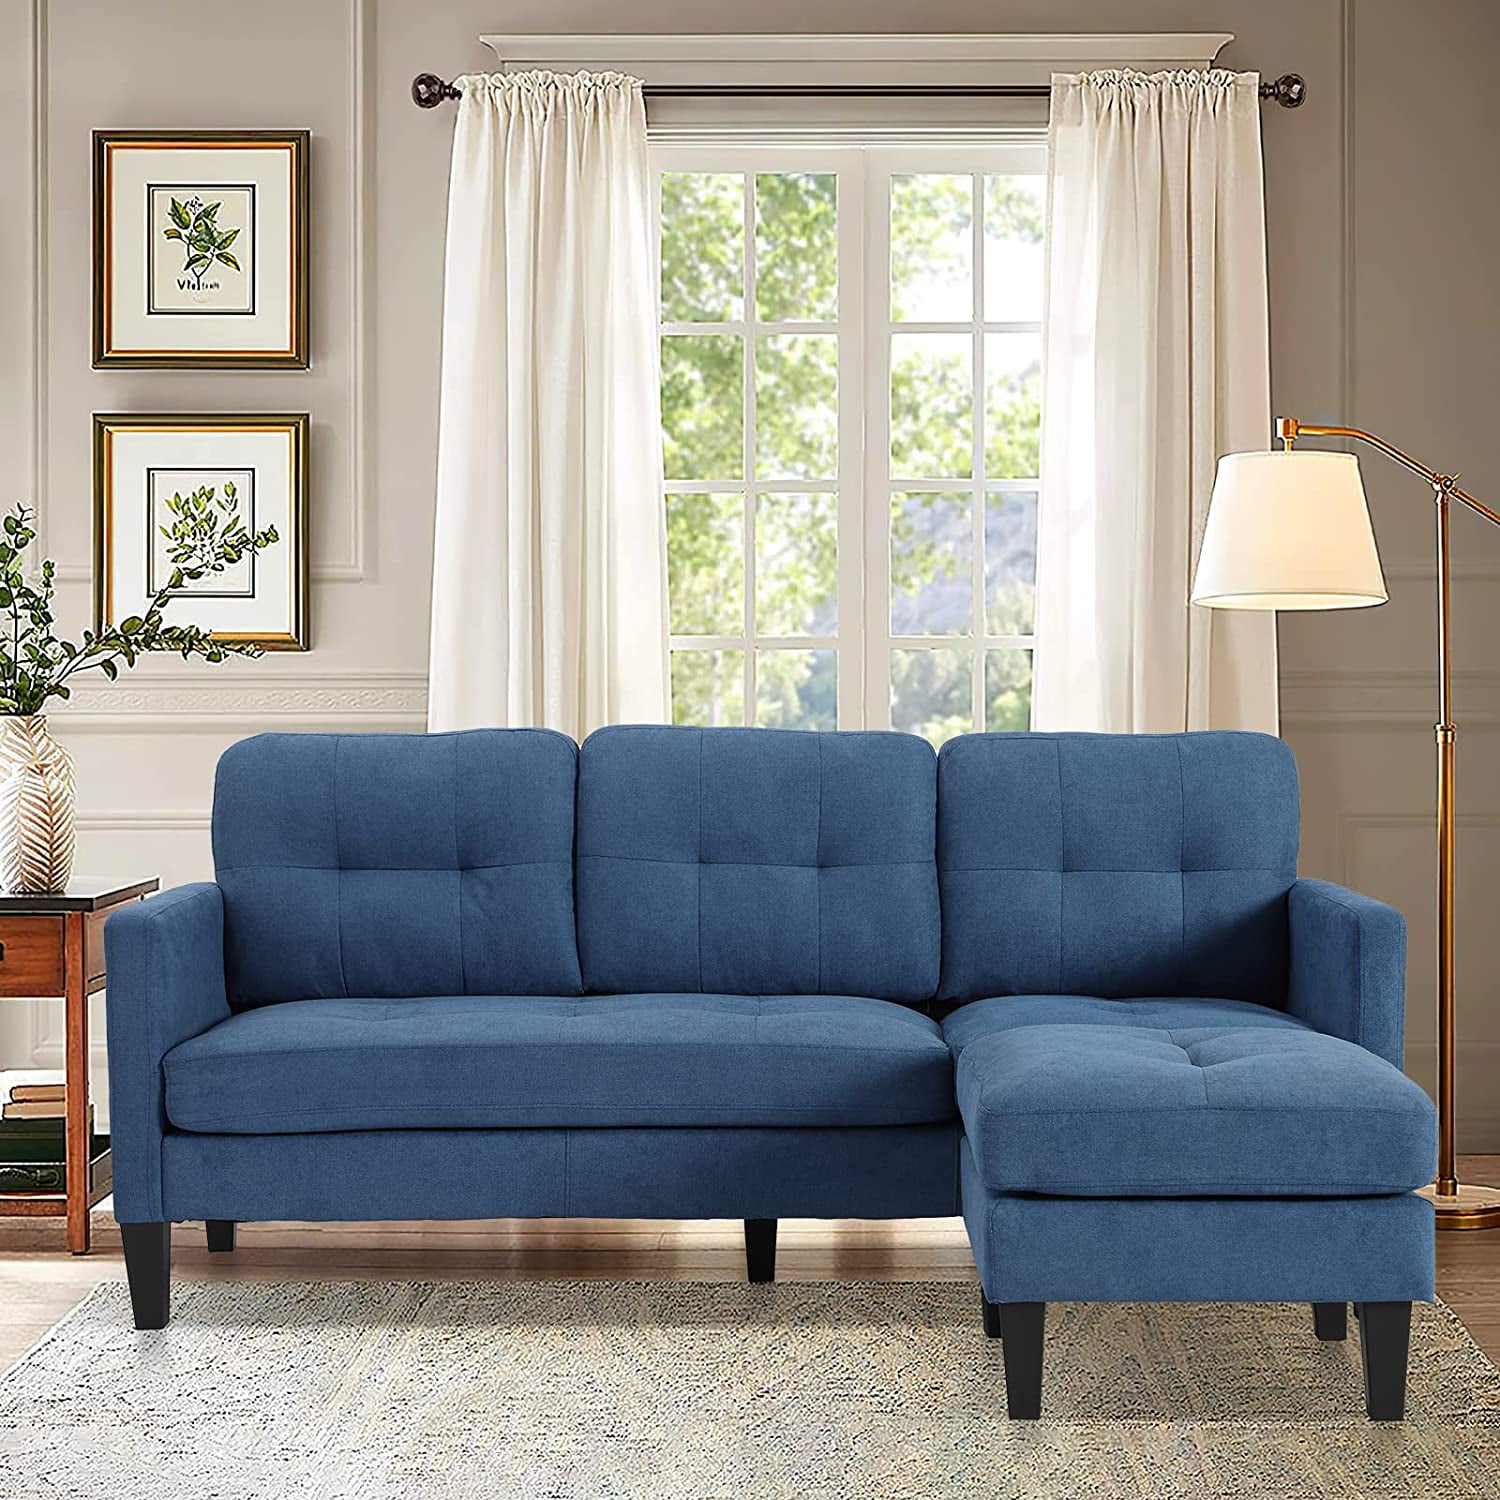 Haverchair Convertible Sectional Sofa, L-Shaped Couch Reversible Chaise ...